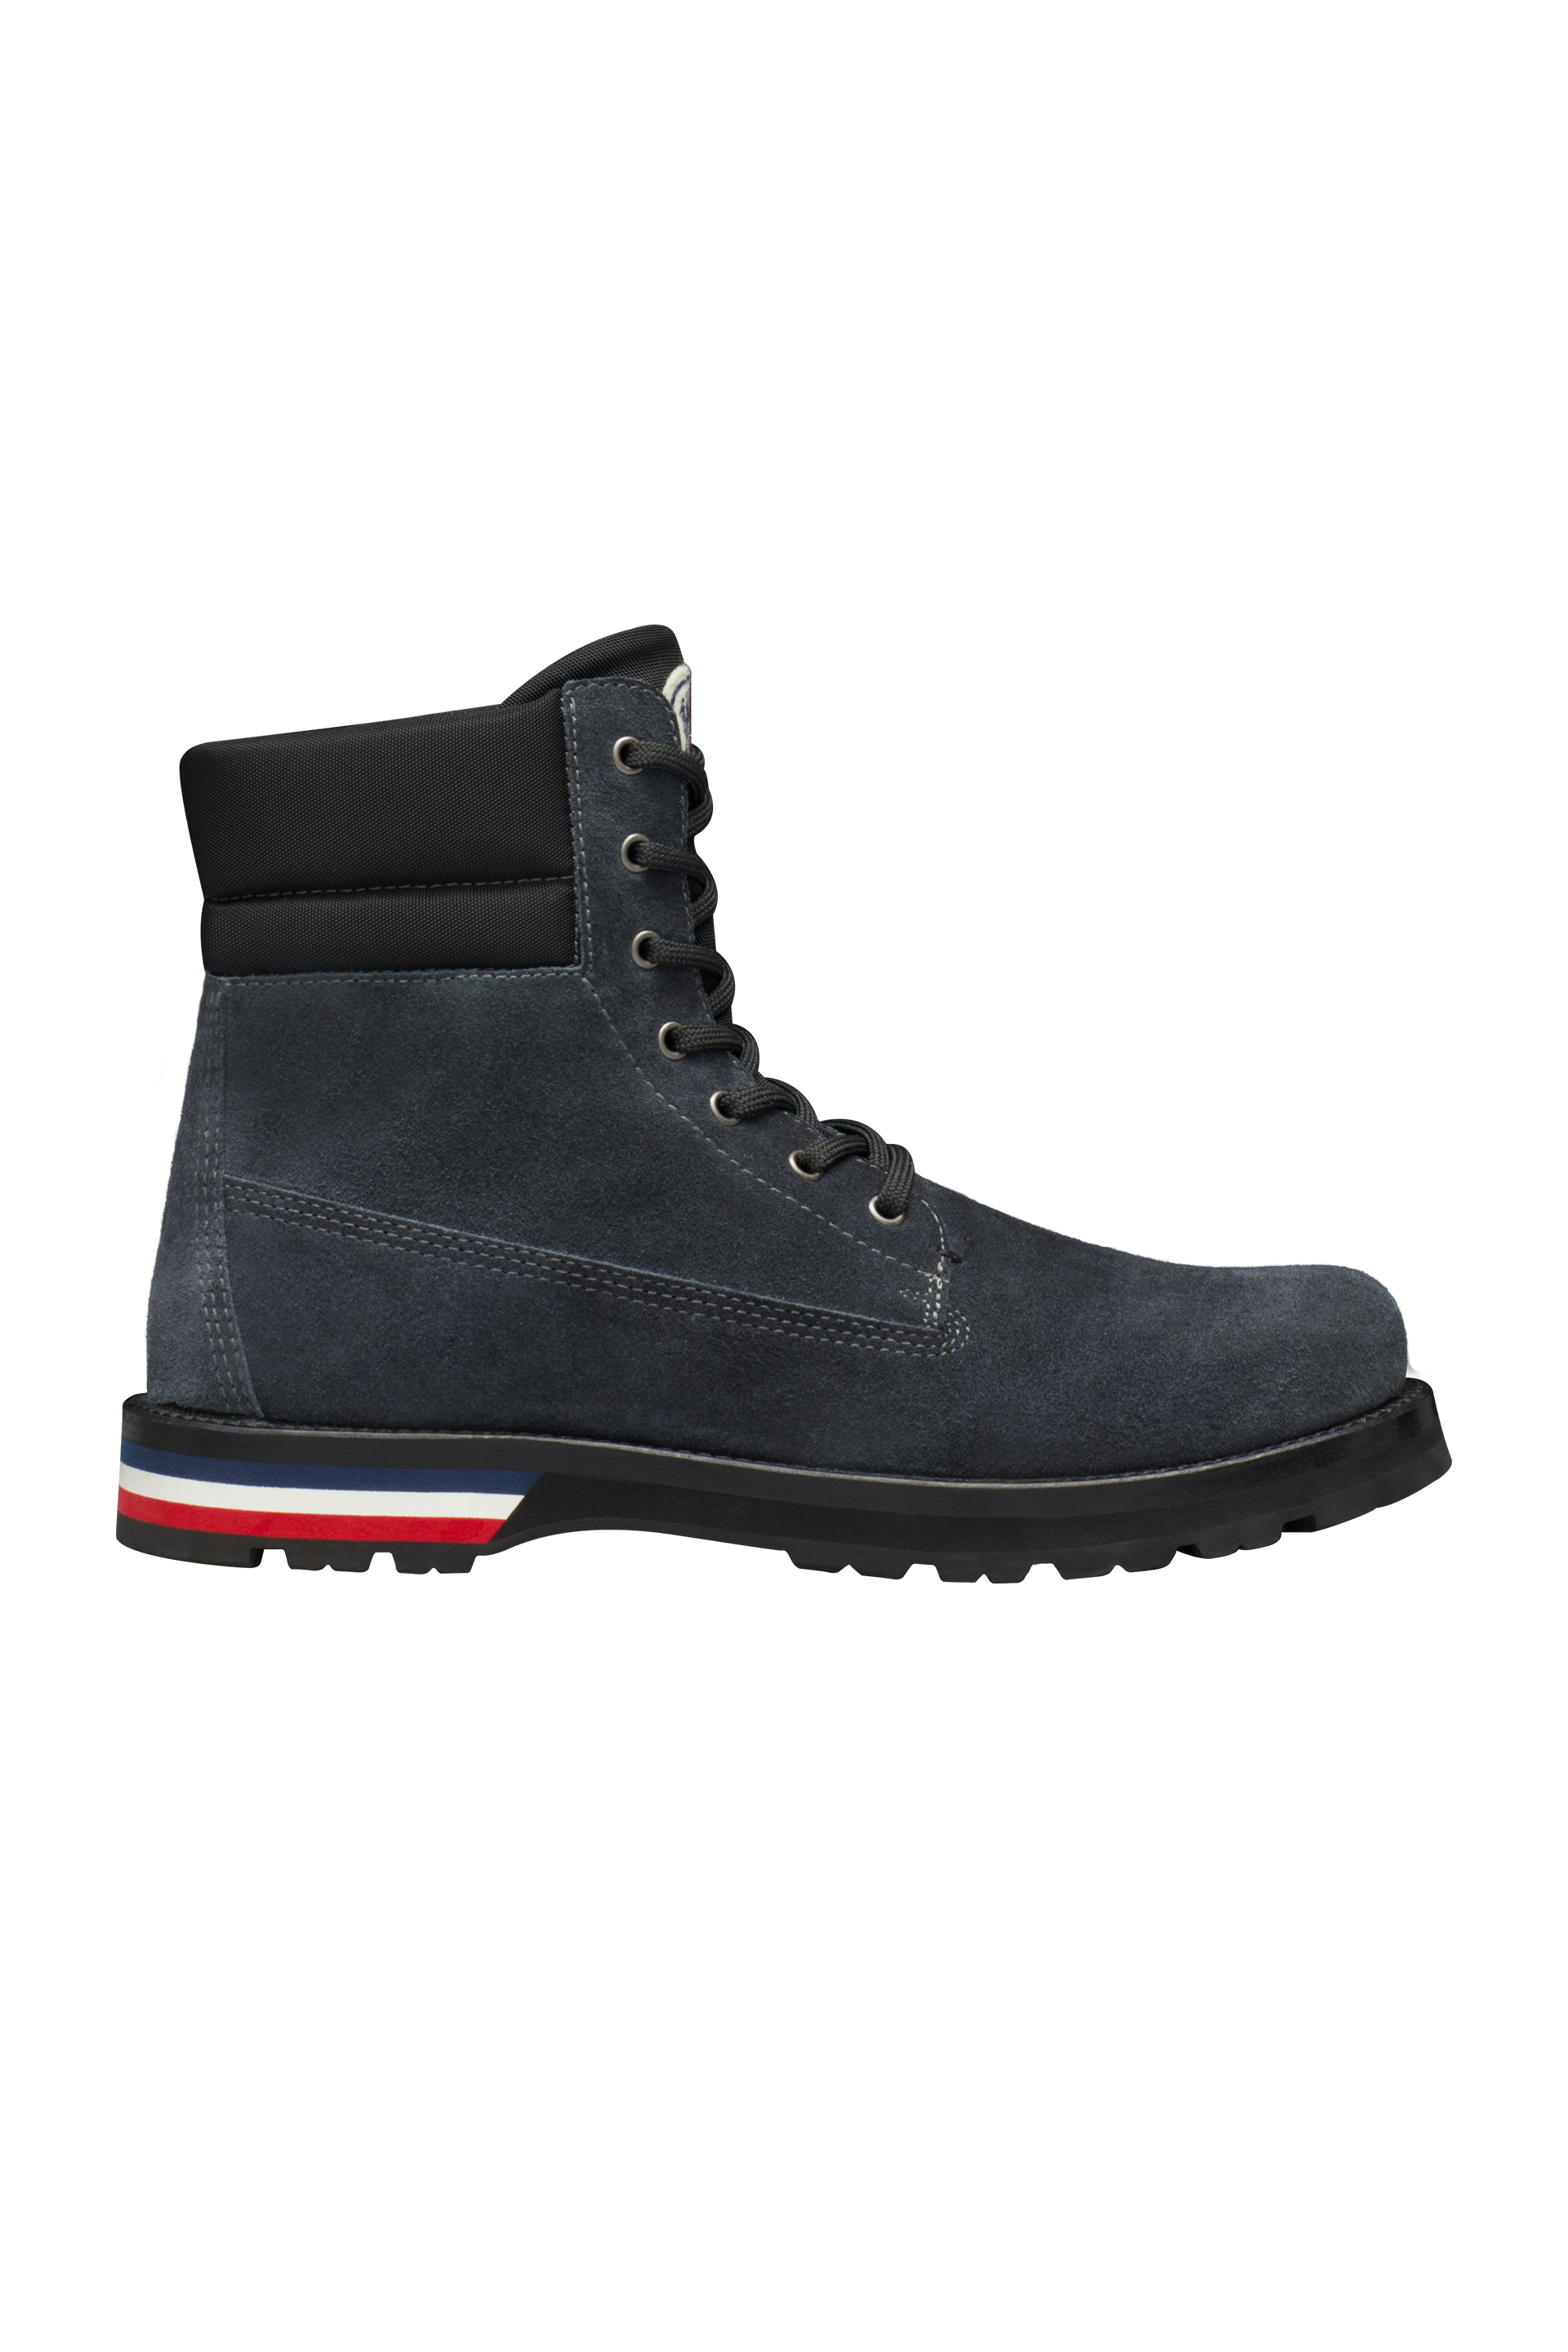 Moncler Collection Vancouver Lace-up Boots Gray Size 44